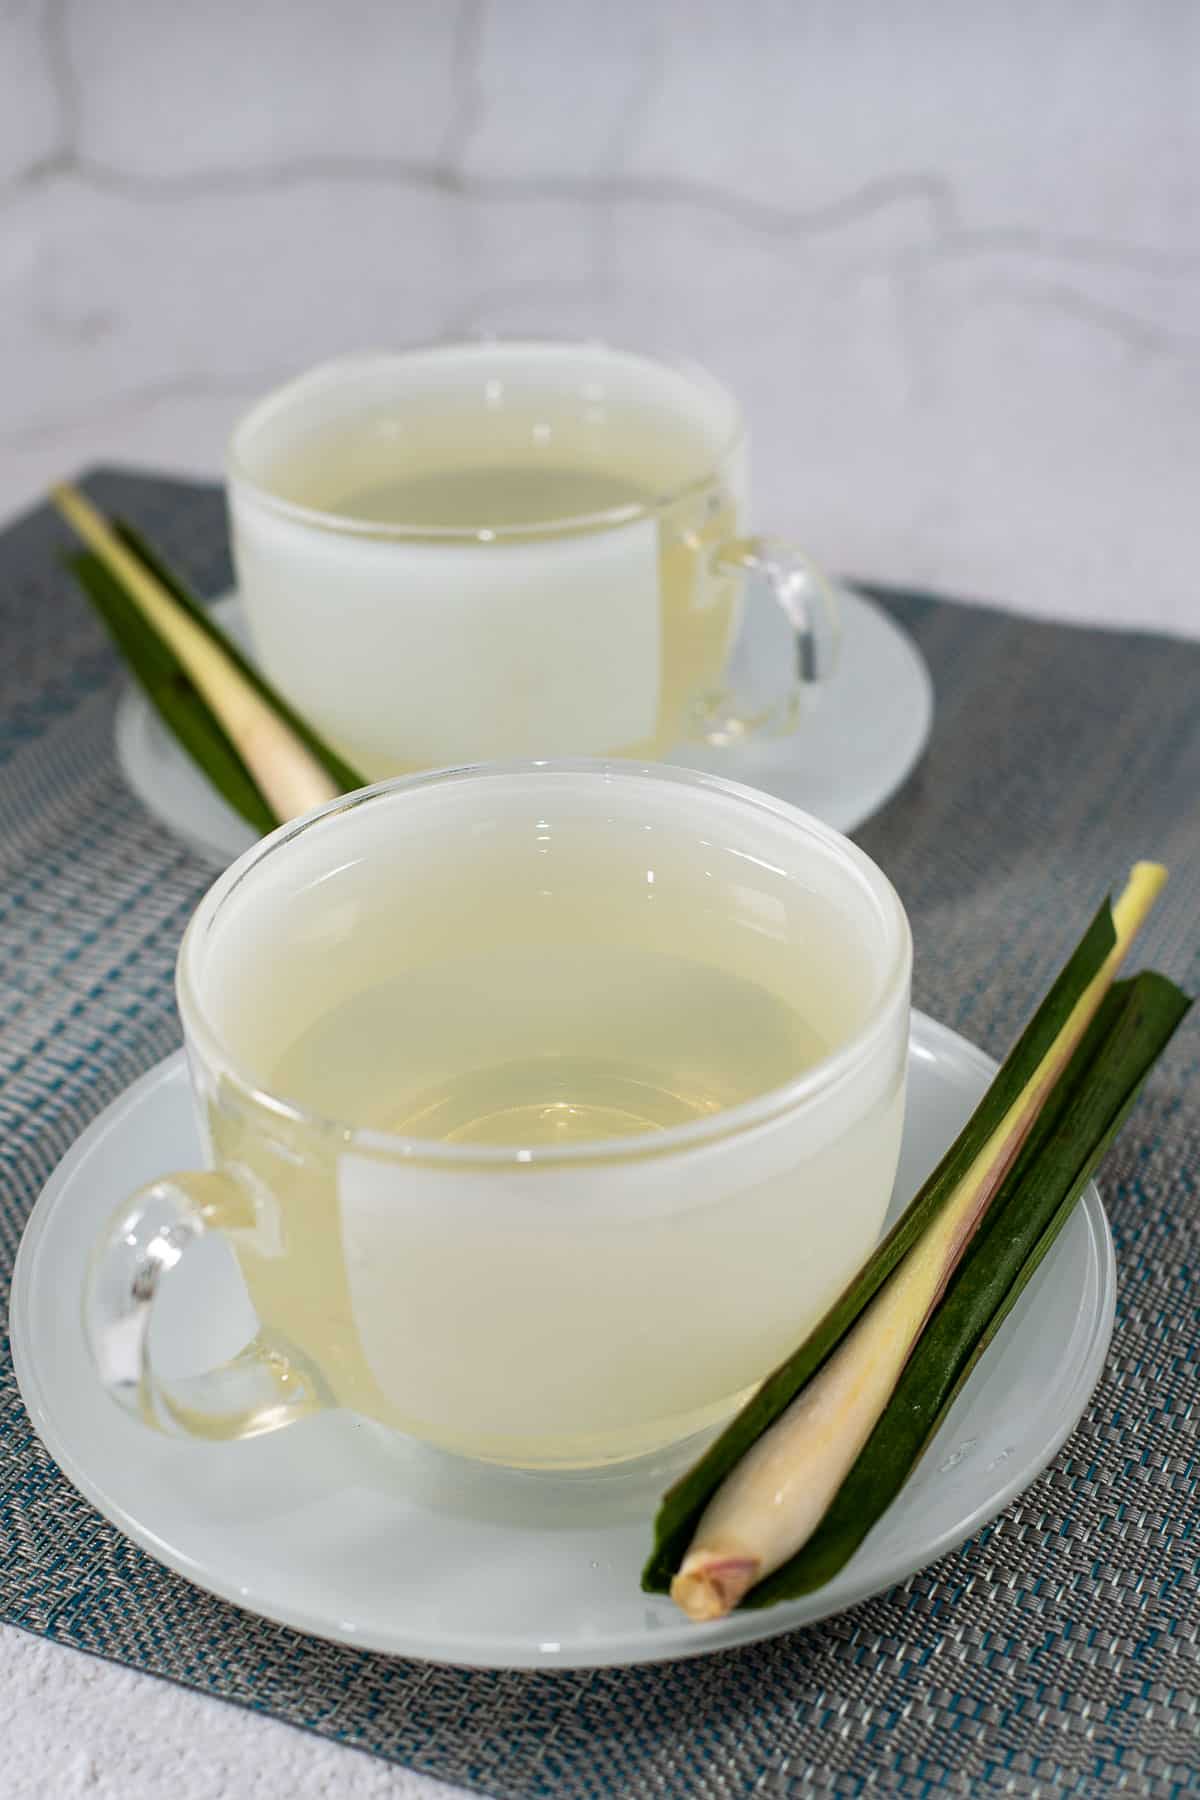 2 cups of drinks with lemongrass and pandan on the saucers.